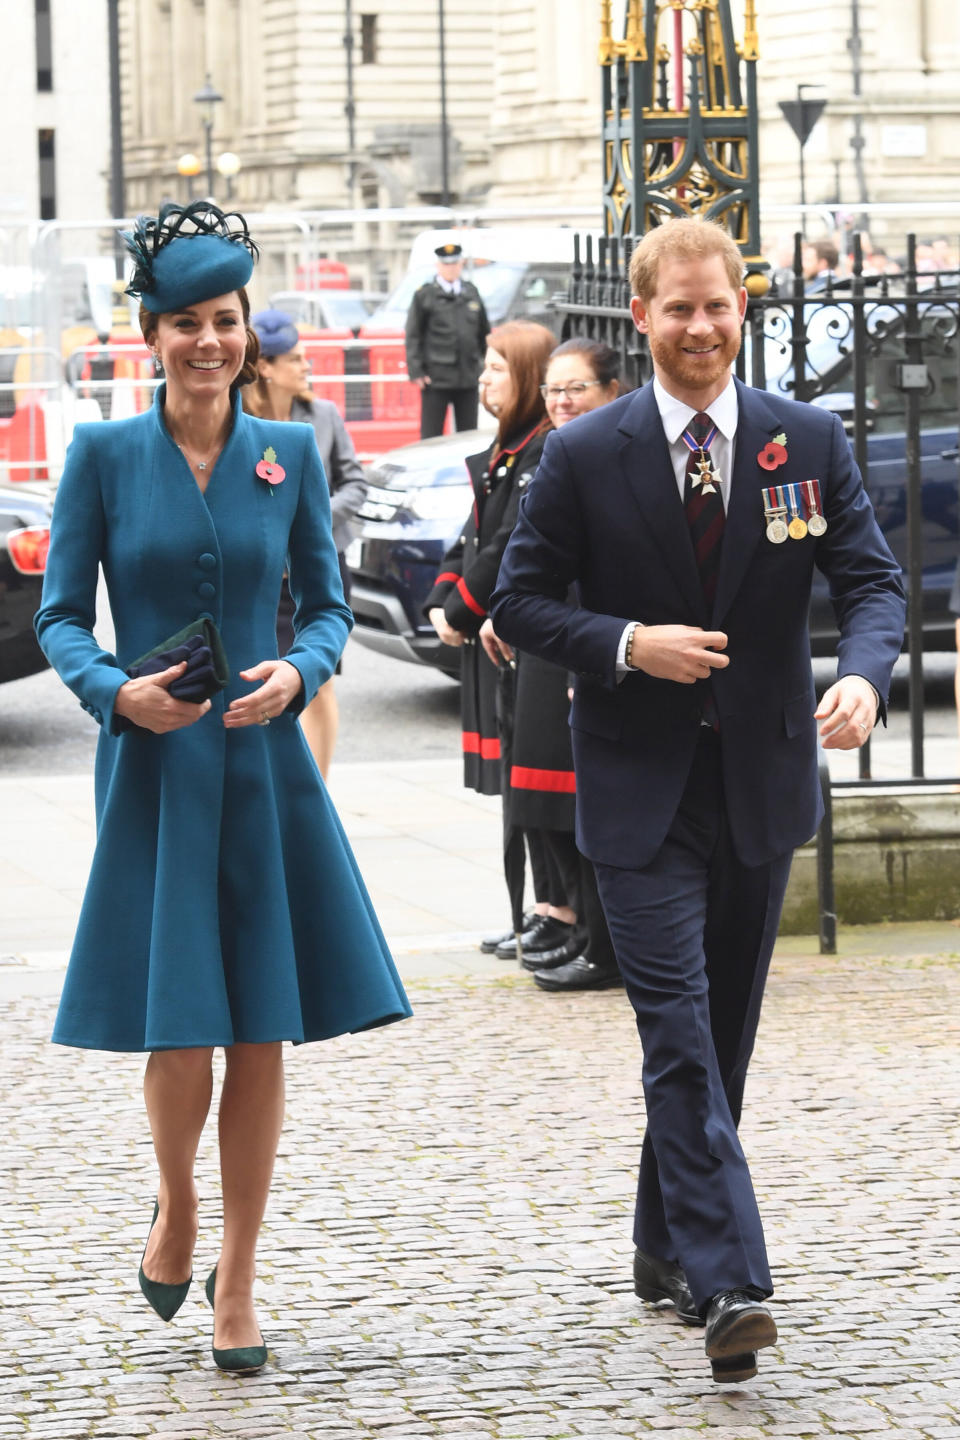 The Duchess of Cambridge and Prince Harry attend a service of commemoration and thanksgiving to mark Anzac Day in Westminster Abbey in London on Thursday. (Photo: JEREMY SELWYN via Getty Images)